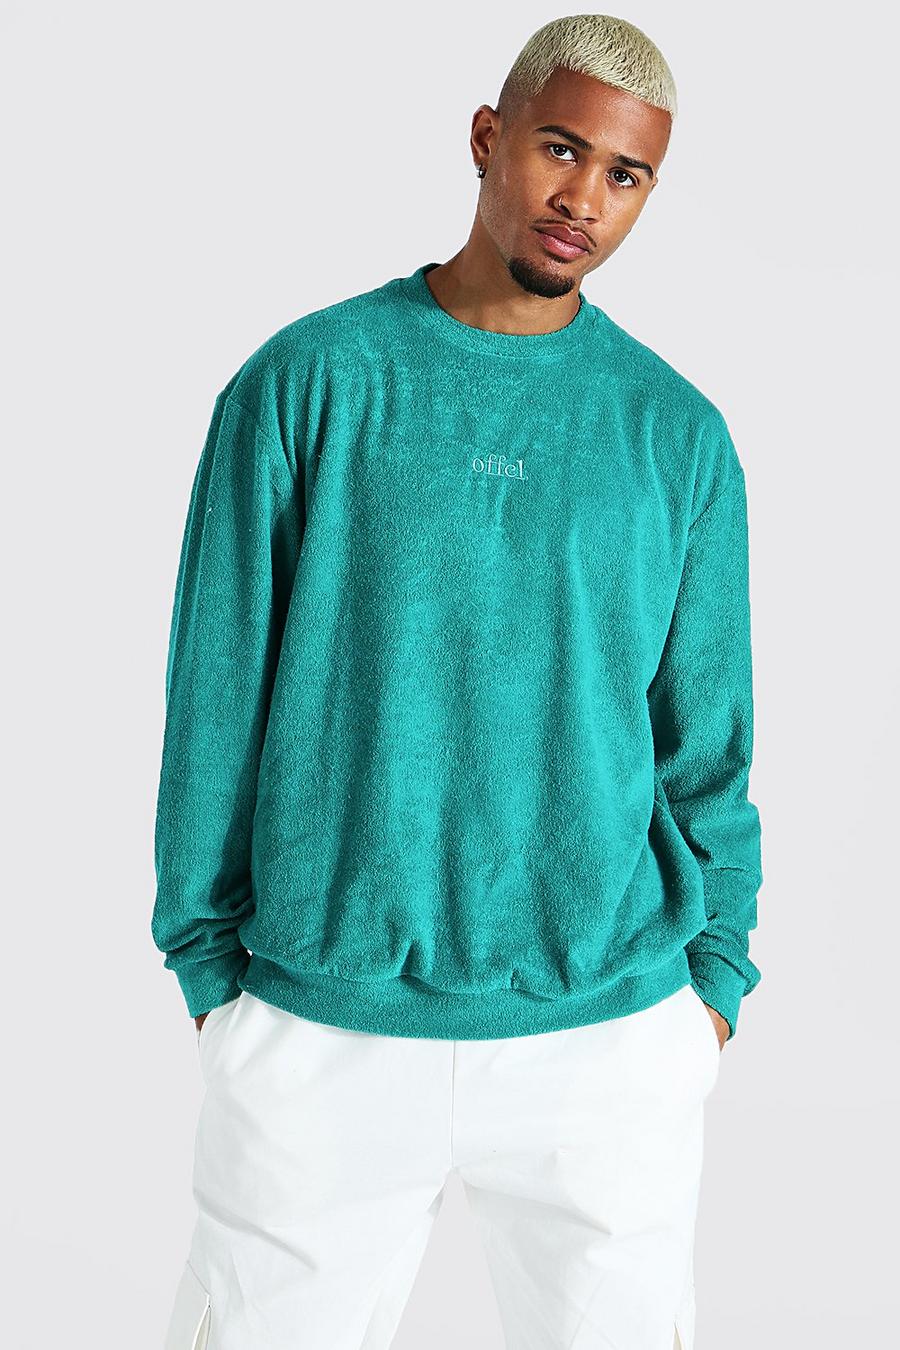 Teal Offcl Oversized Badstoffen Trui image number 1